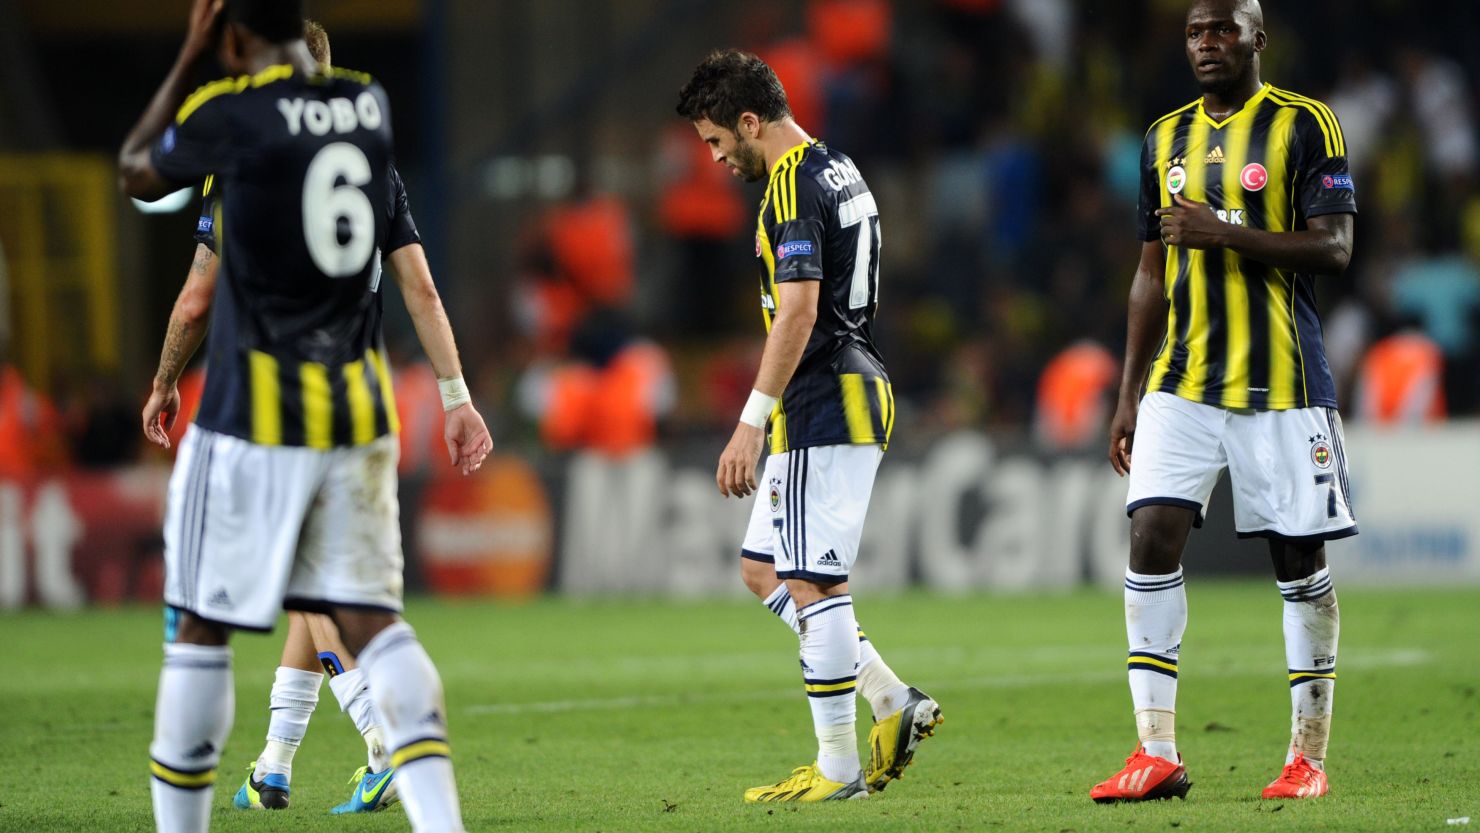 Fenerbahce were beaten 5-0 on aggregate in a two-legged Champions League playoff against Arsenal.